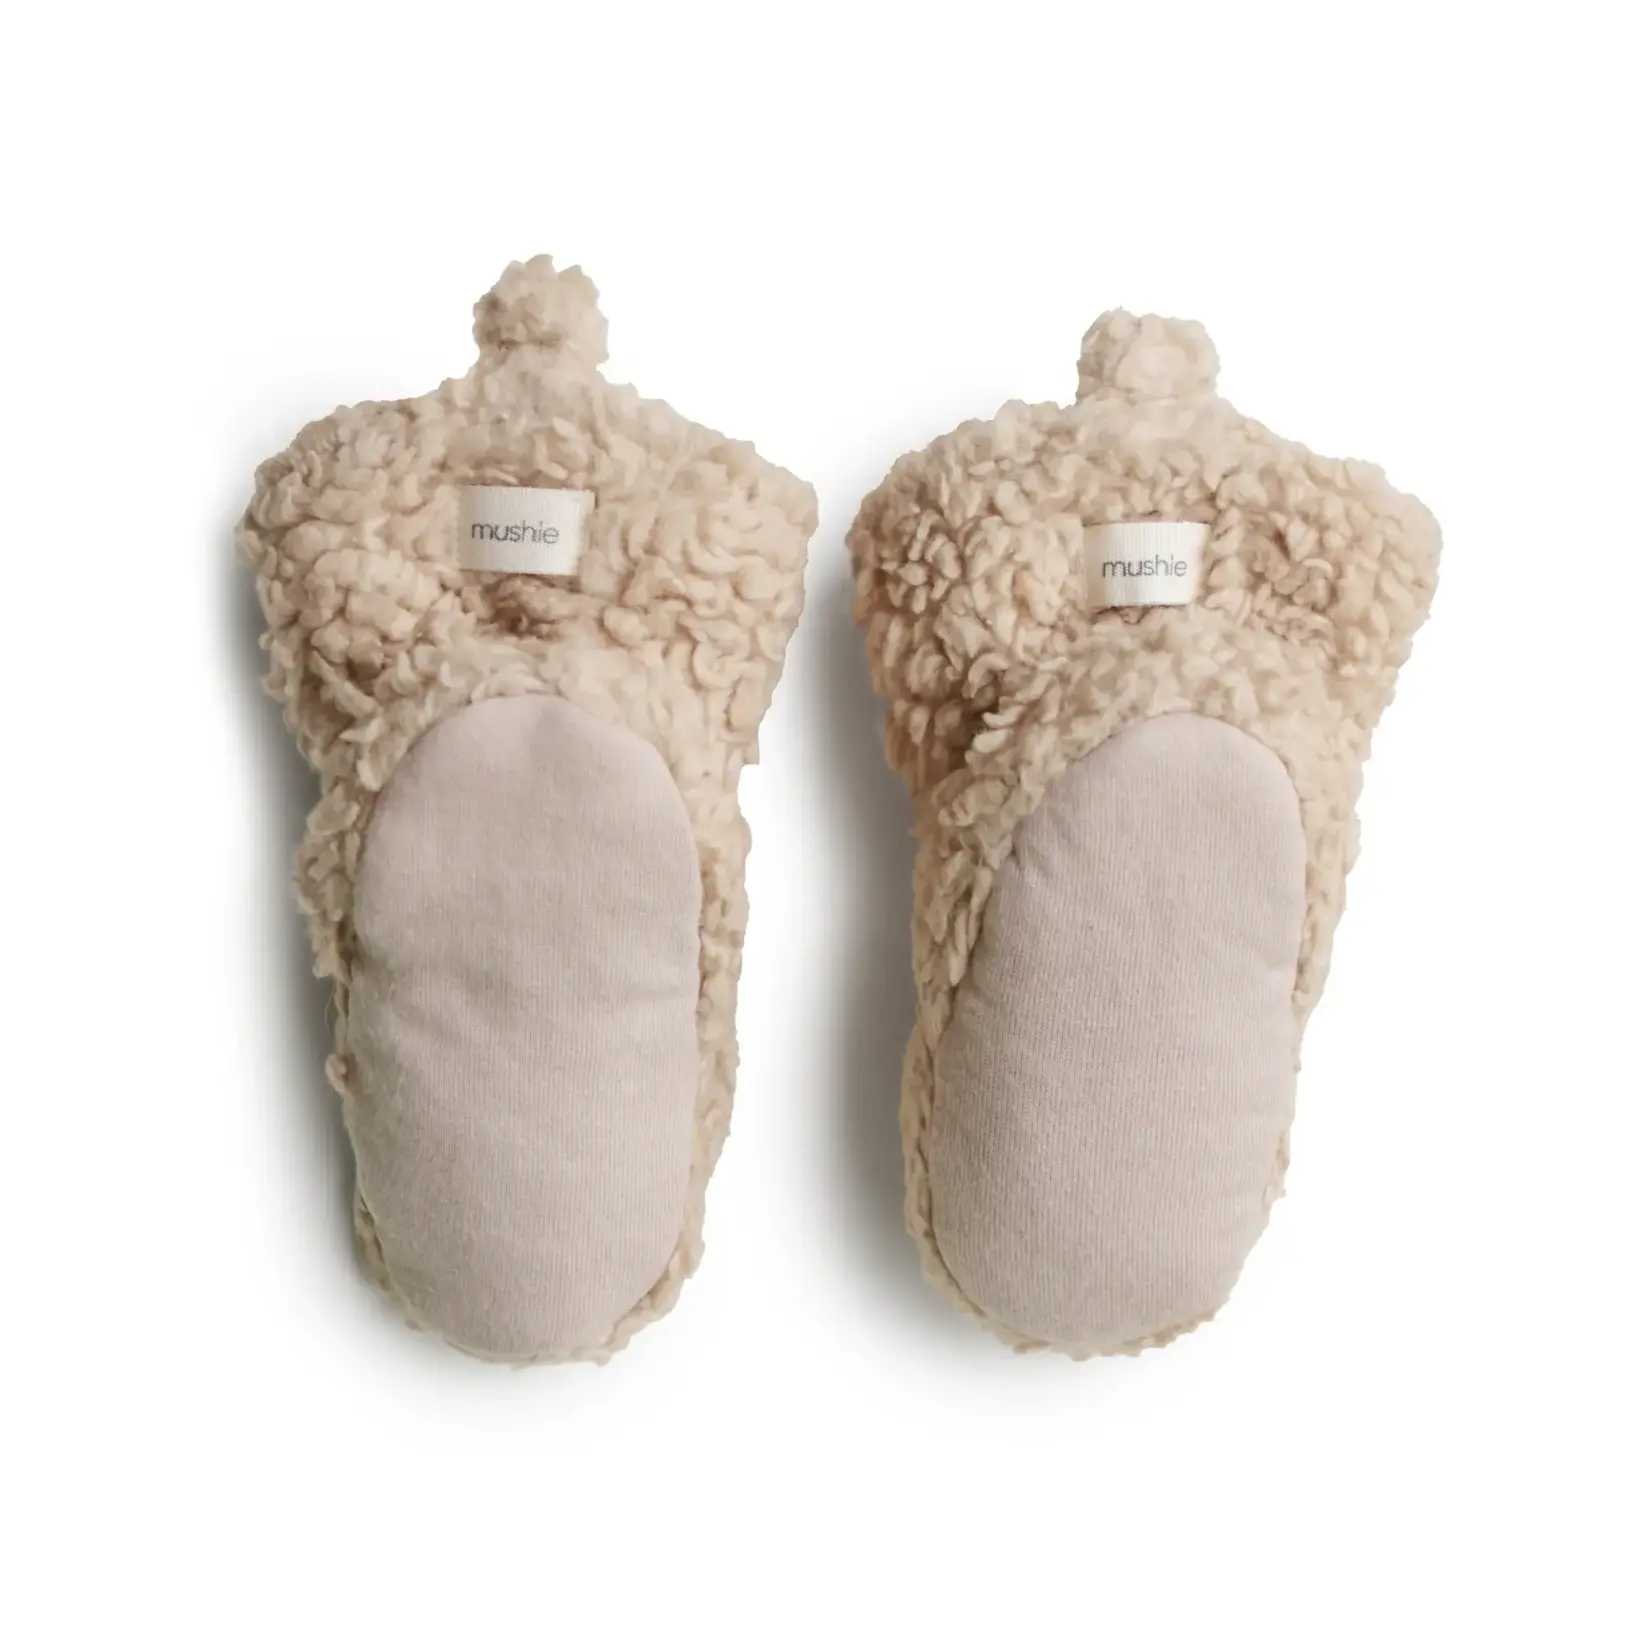 Mushie Cozy Baby booties chaussons bébé mouton Oatmeal 0-3M